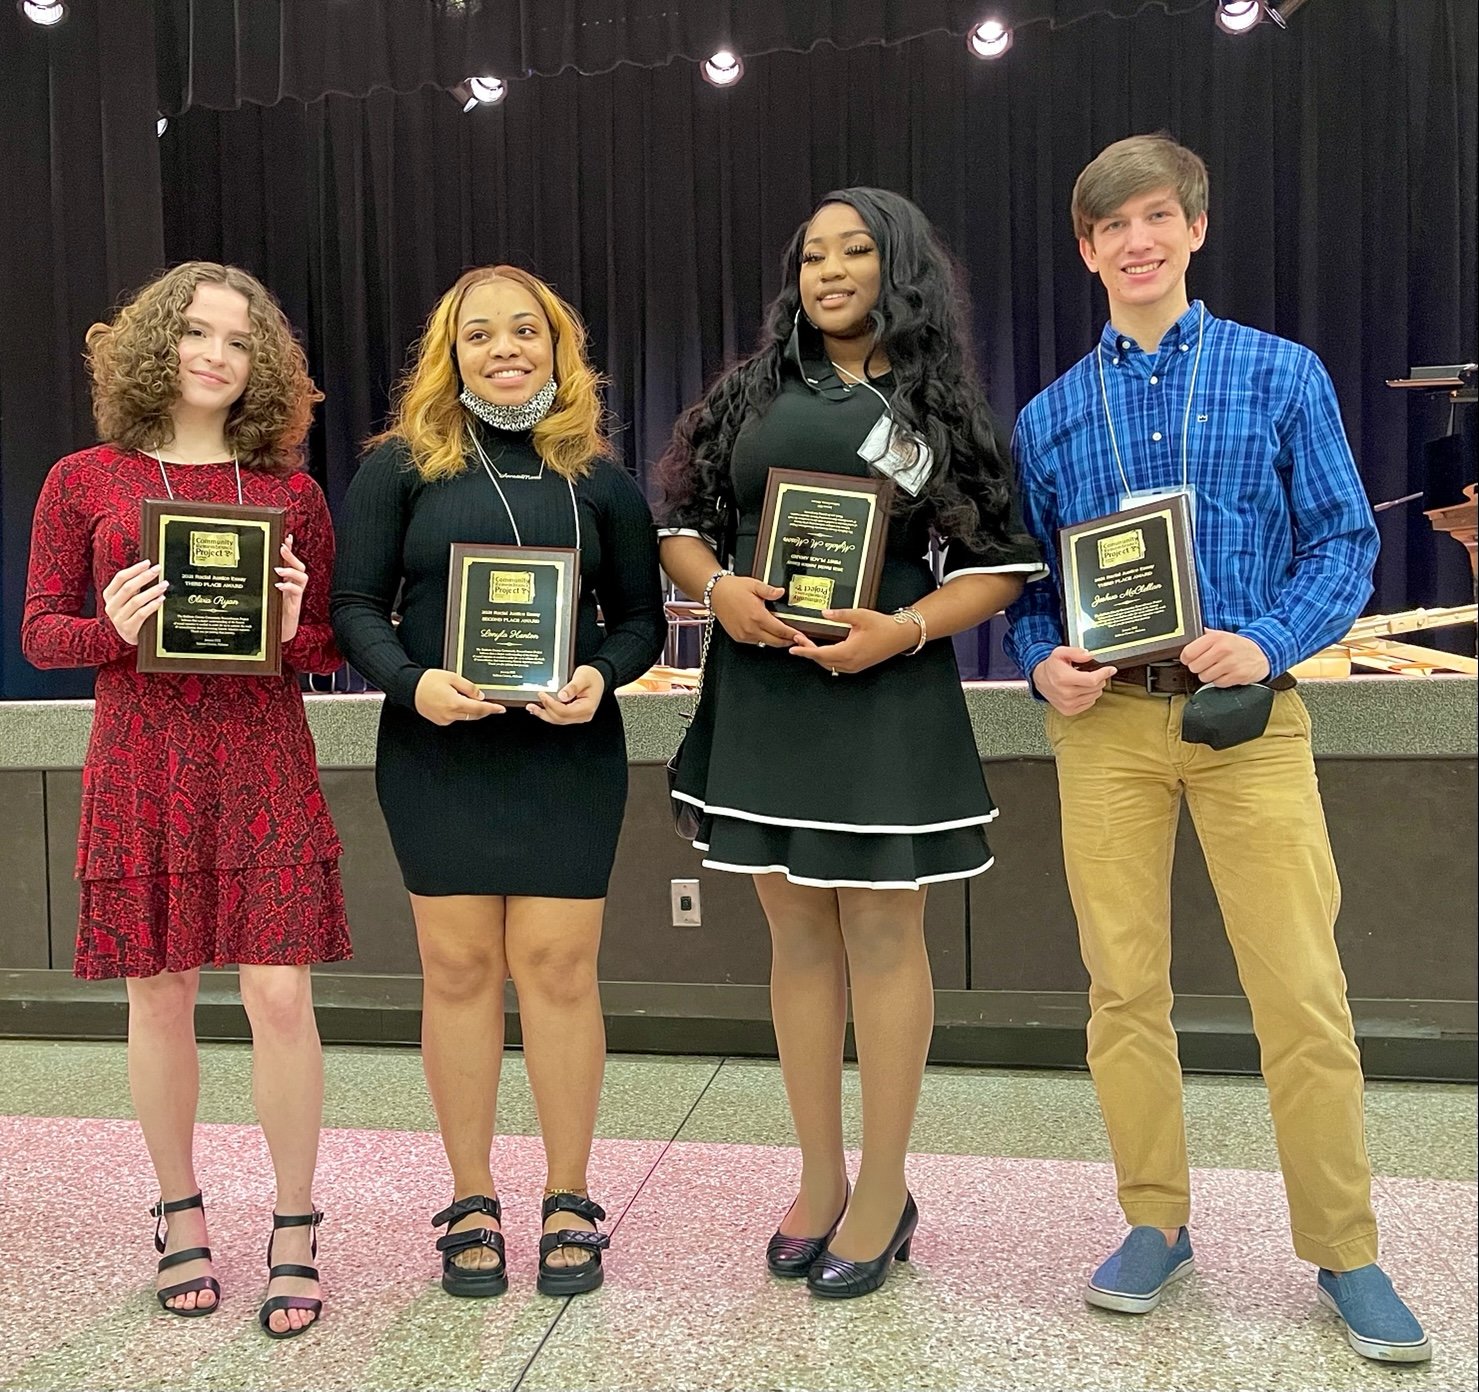 The 2022 Dr. Martin Luther King Day Celebration was held in Foley on Monday, Jan. 17. Winners of the Baldwin County Racial Justice Essay Contest were announced during the event. Students receiving top honors and scholarship awards include (from left) Robertsdale High School 10th grader Olivia Ryan in 3rd place ($750); Foley High School 12th grader Lonyla Henton in 2nd place ($1,500); Daphne High School 11th grader Mykala M. Mason in 1st place ($2,000); and Spanish Fort High School 12th grader Joshua McClellan in 3rd place ($750).